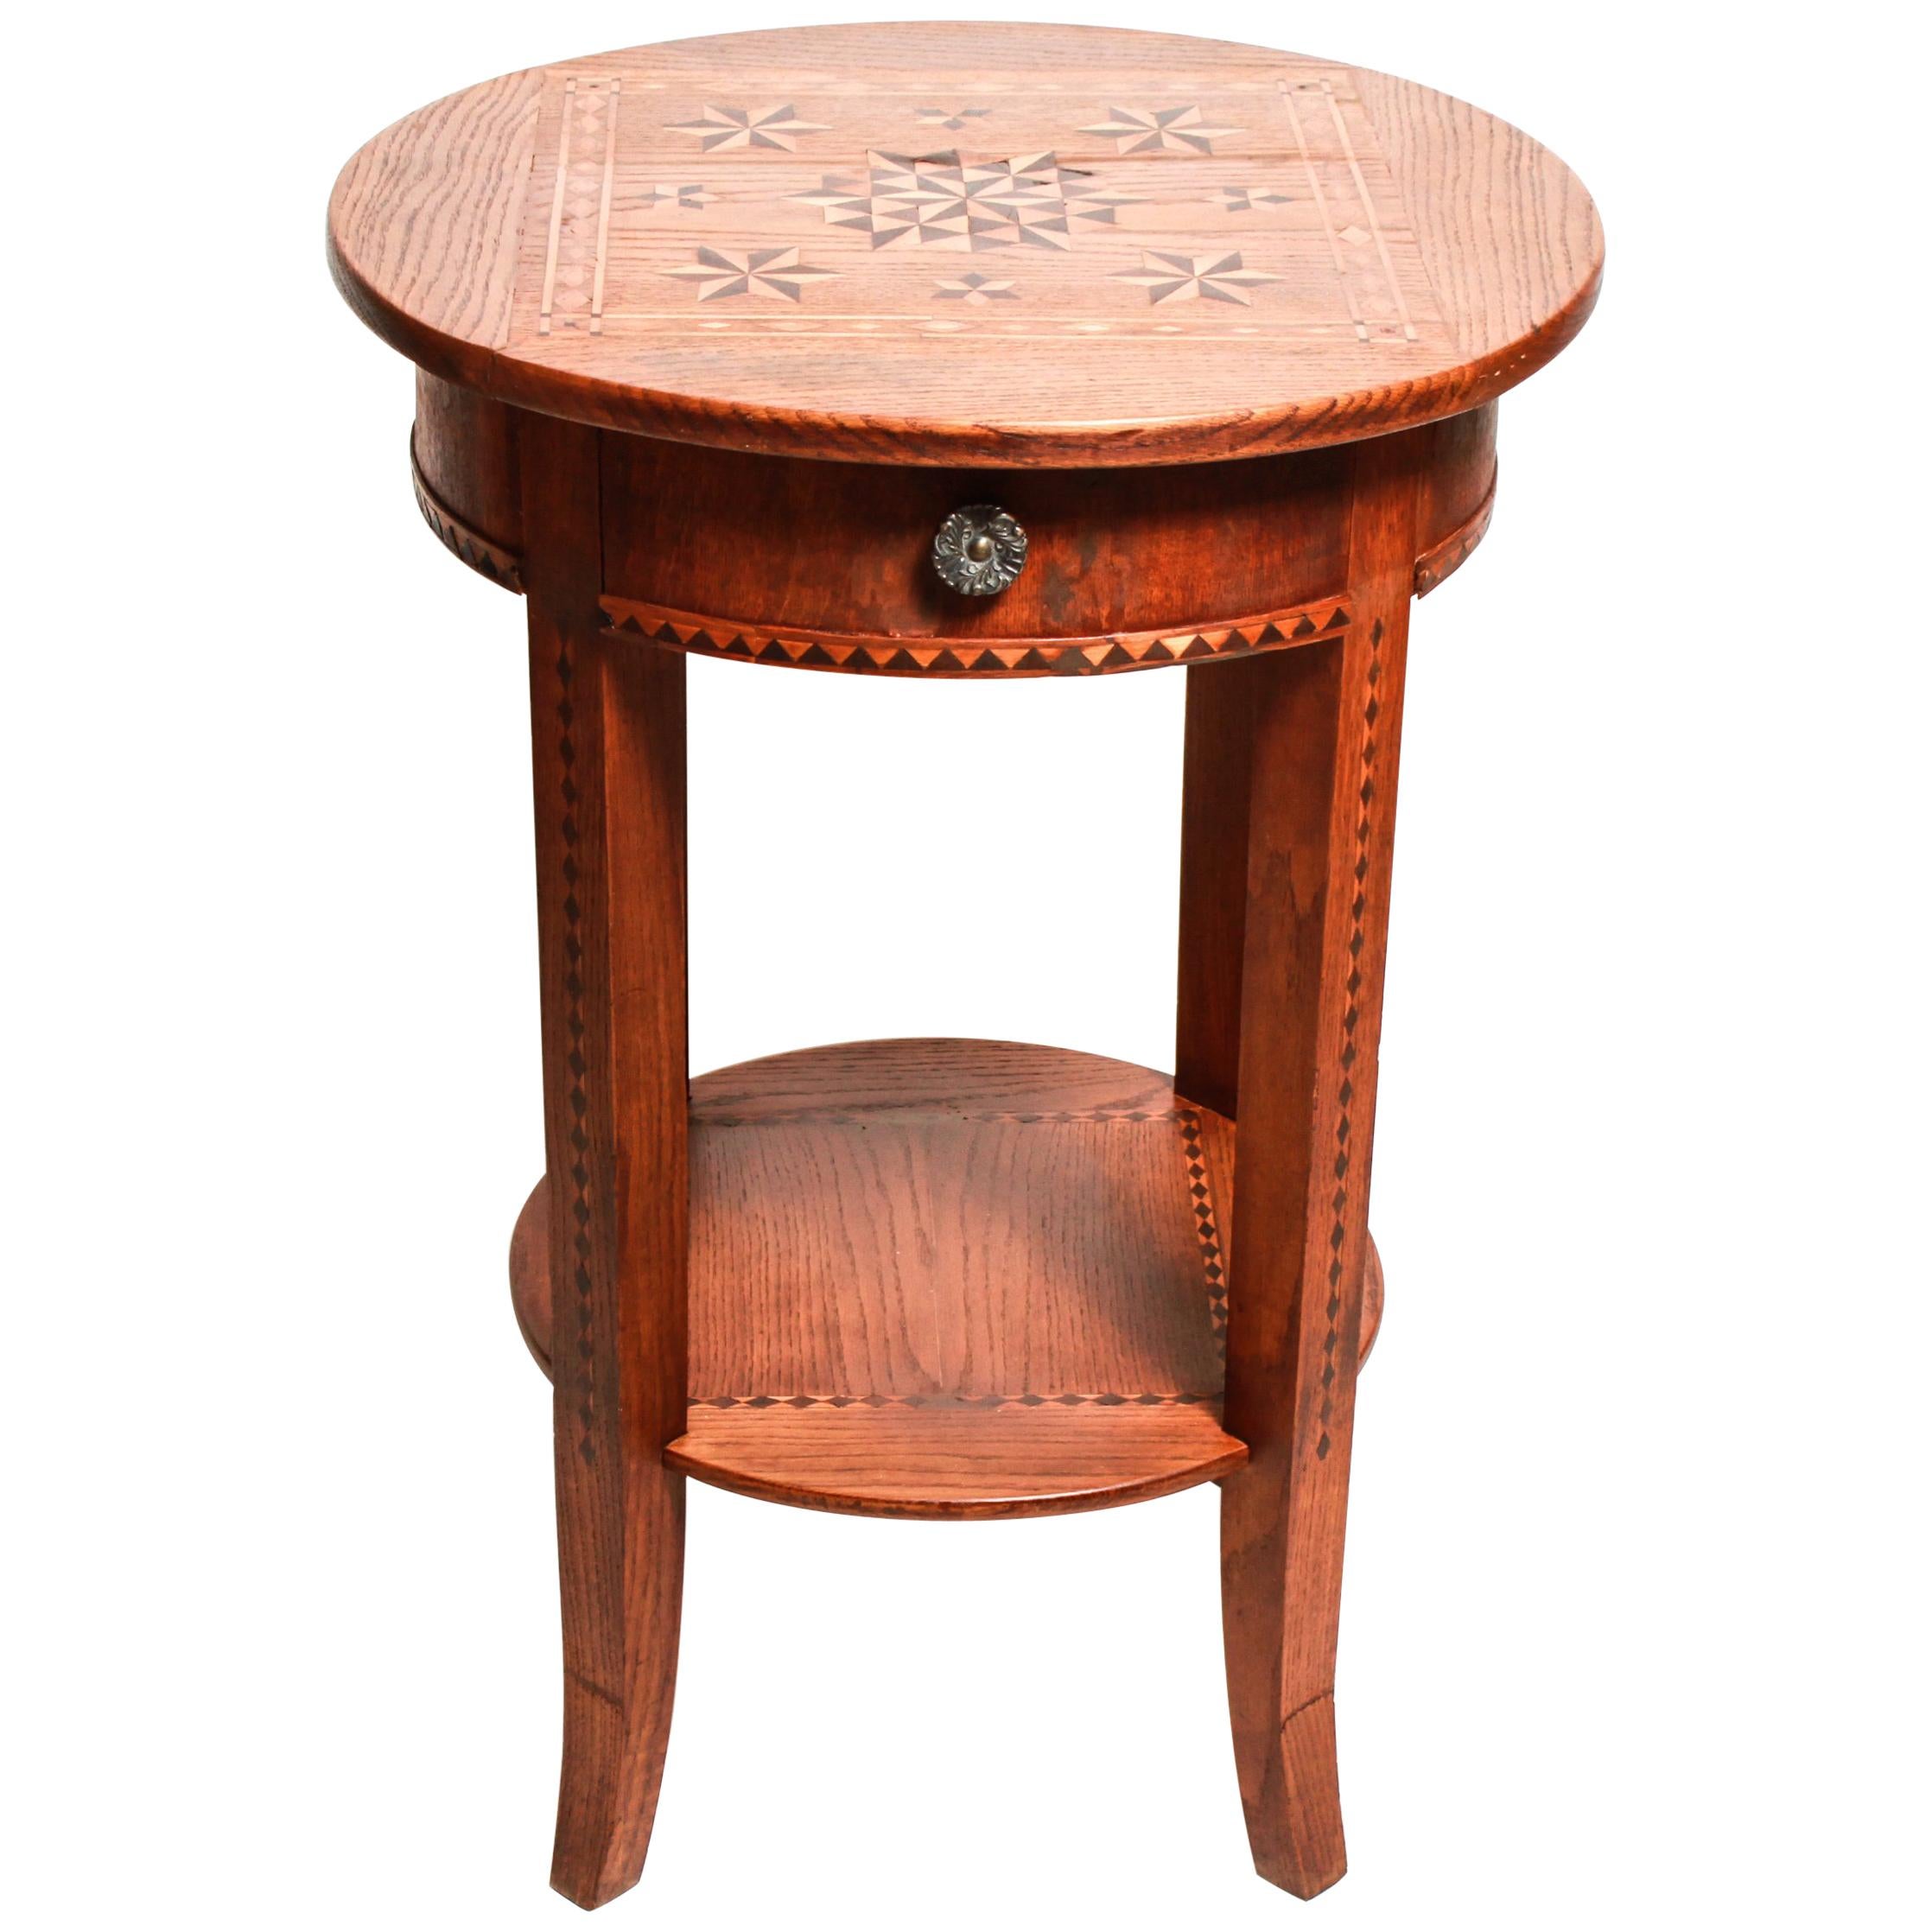 Swiss Rustic Side Table with Geometric Parquetry